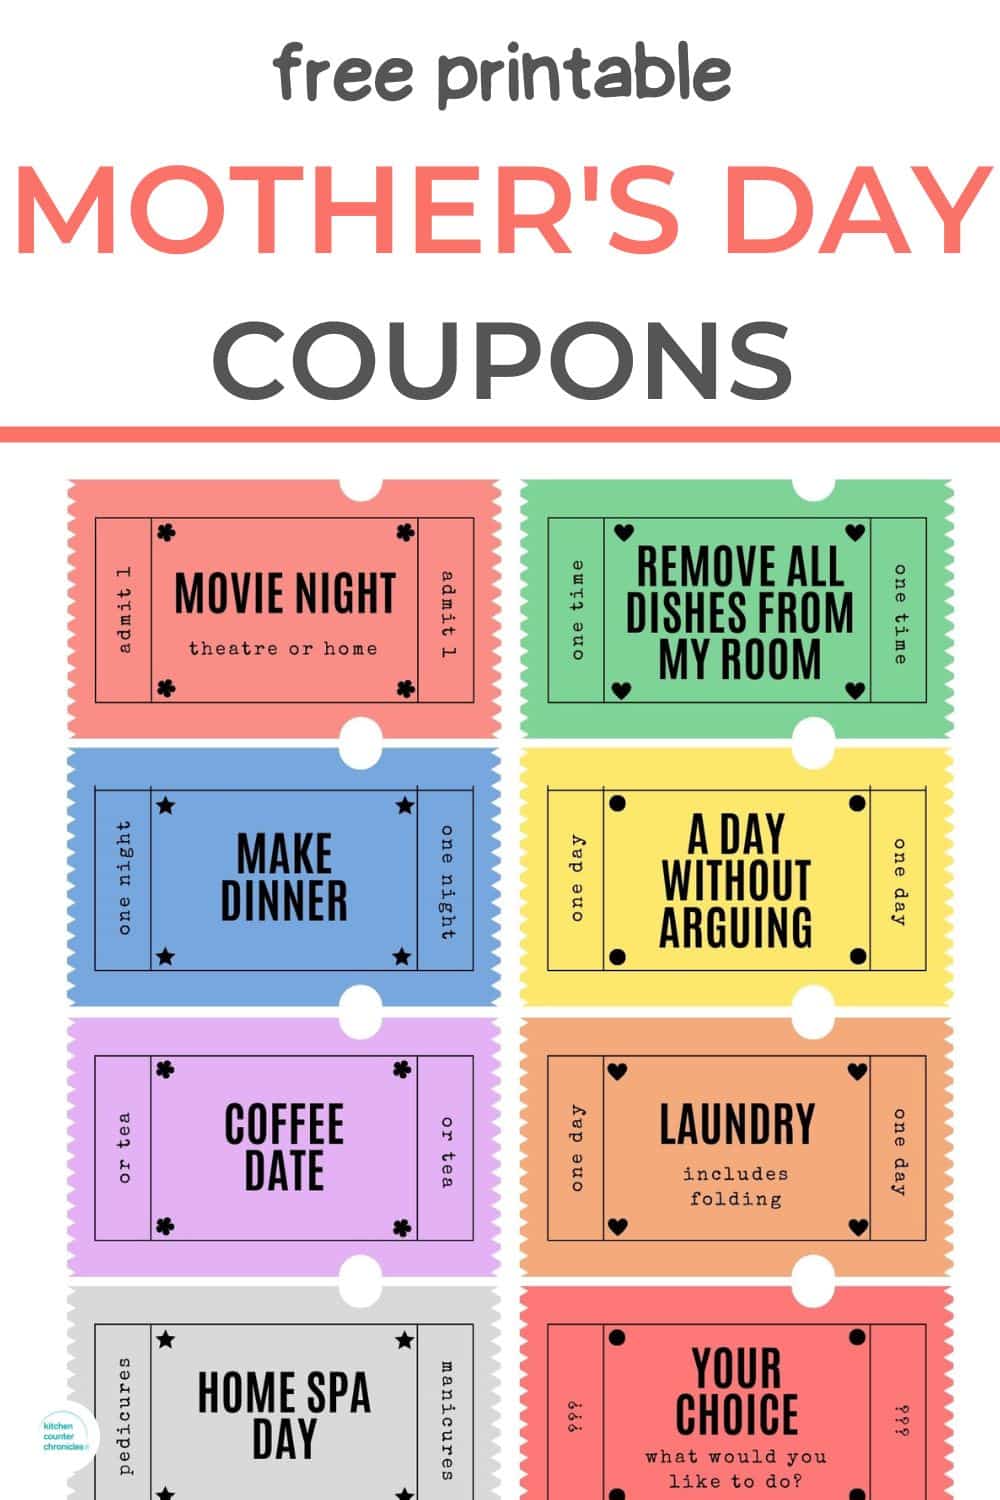 free printable mother's day coupons with title free printable mother's day coupons  pin image